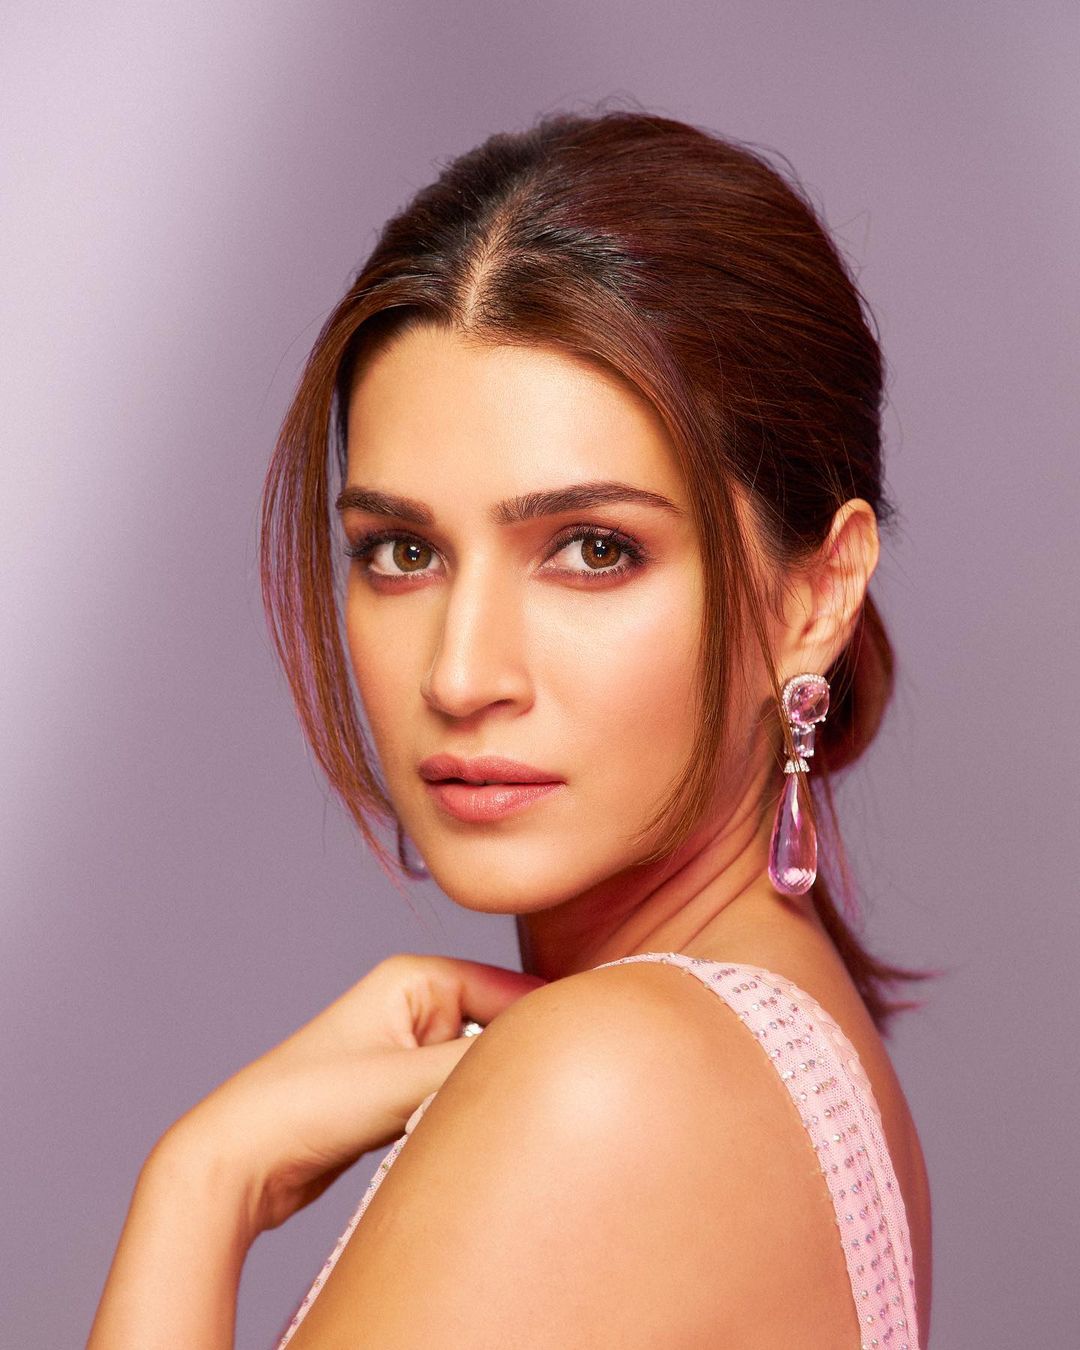 Kriti Sanon looks flawless in the barely-there makeup